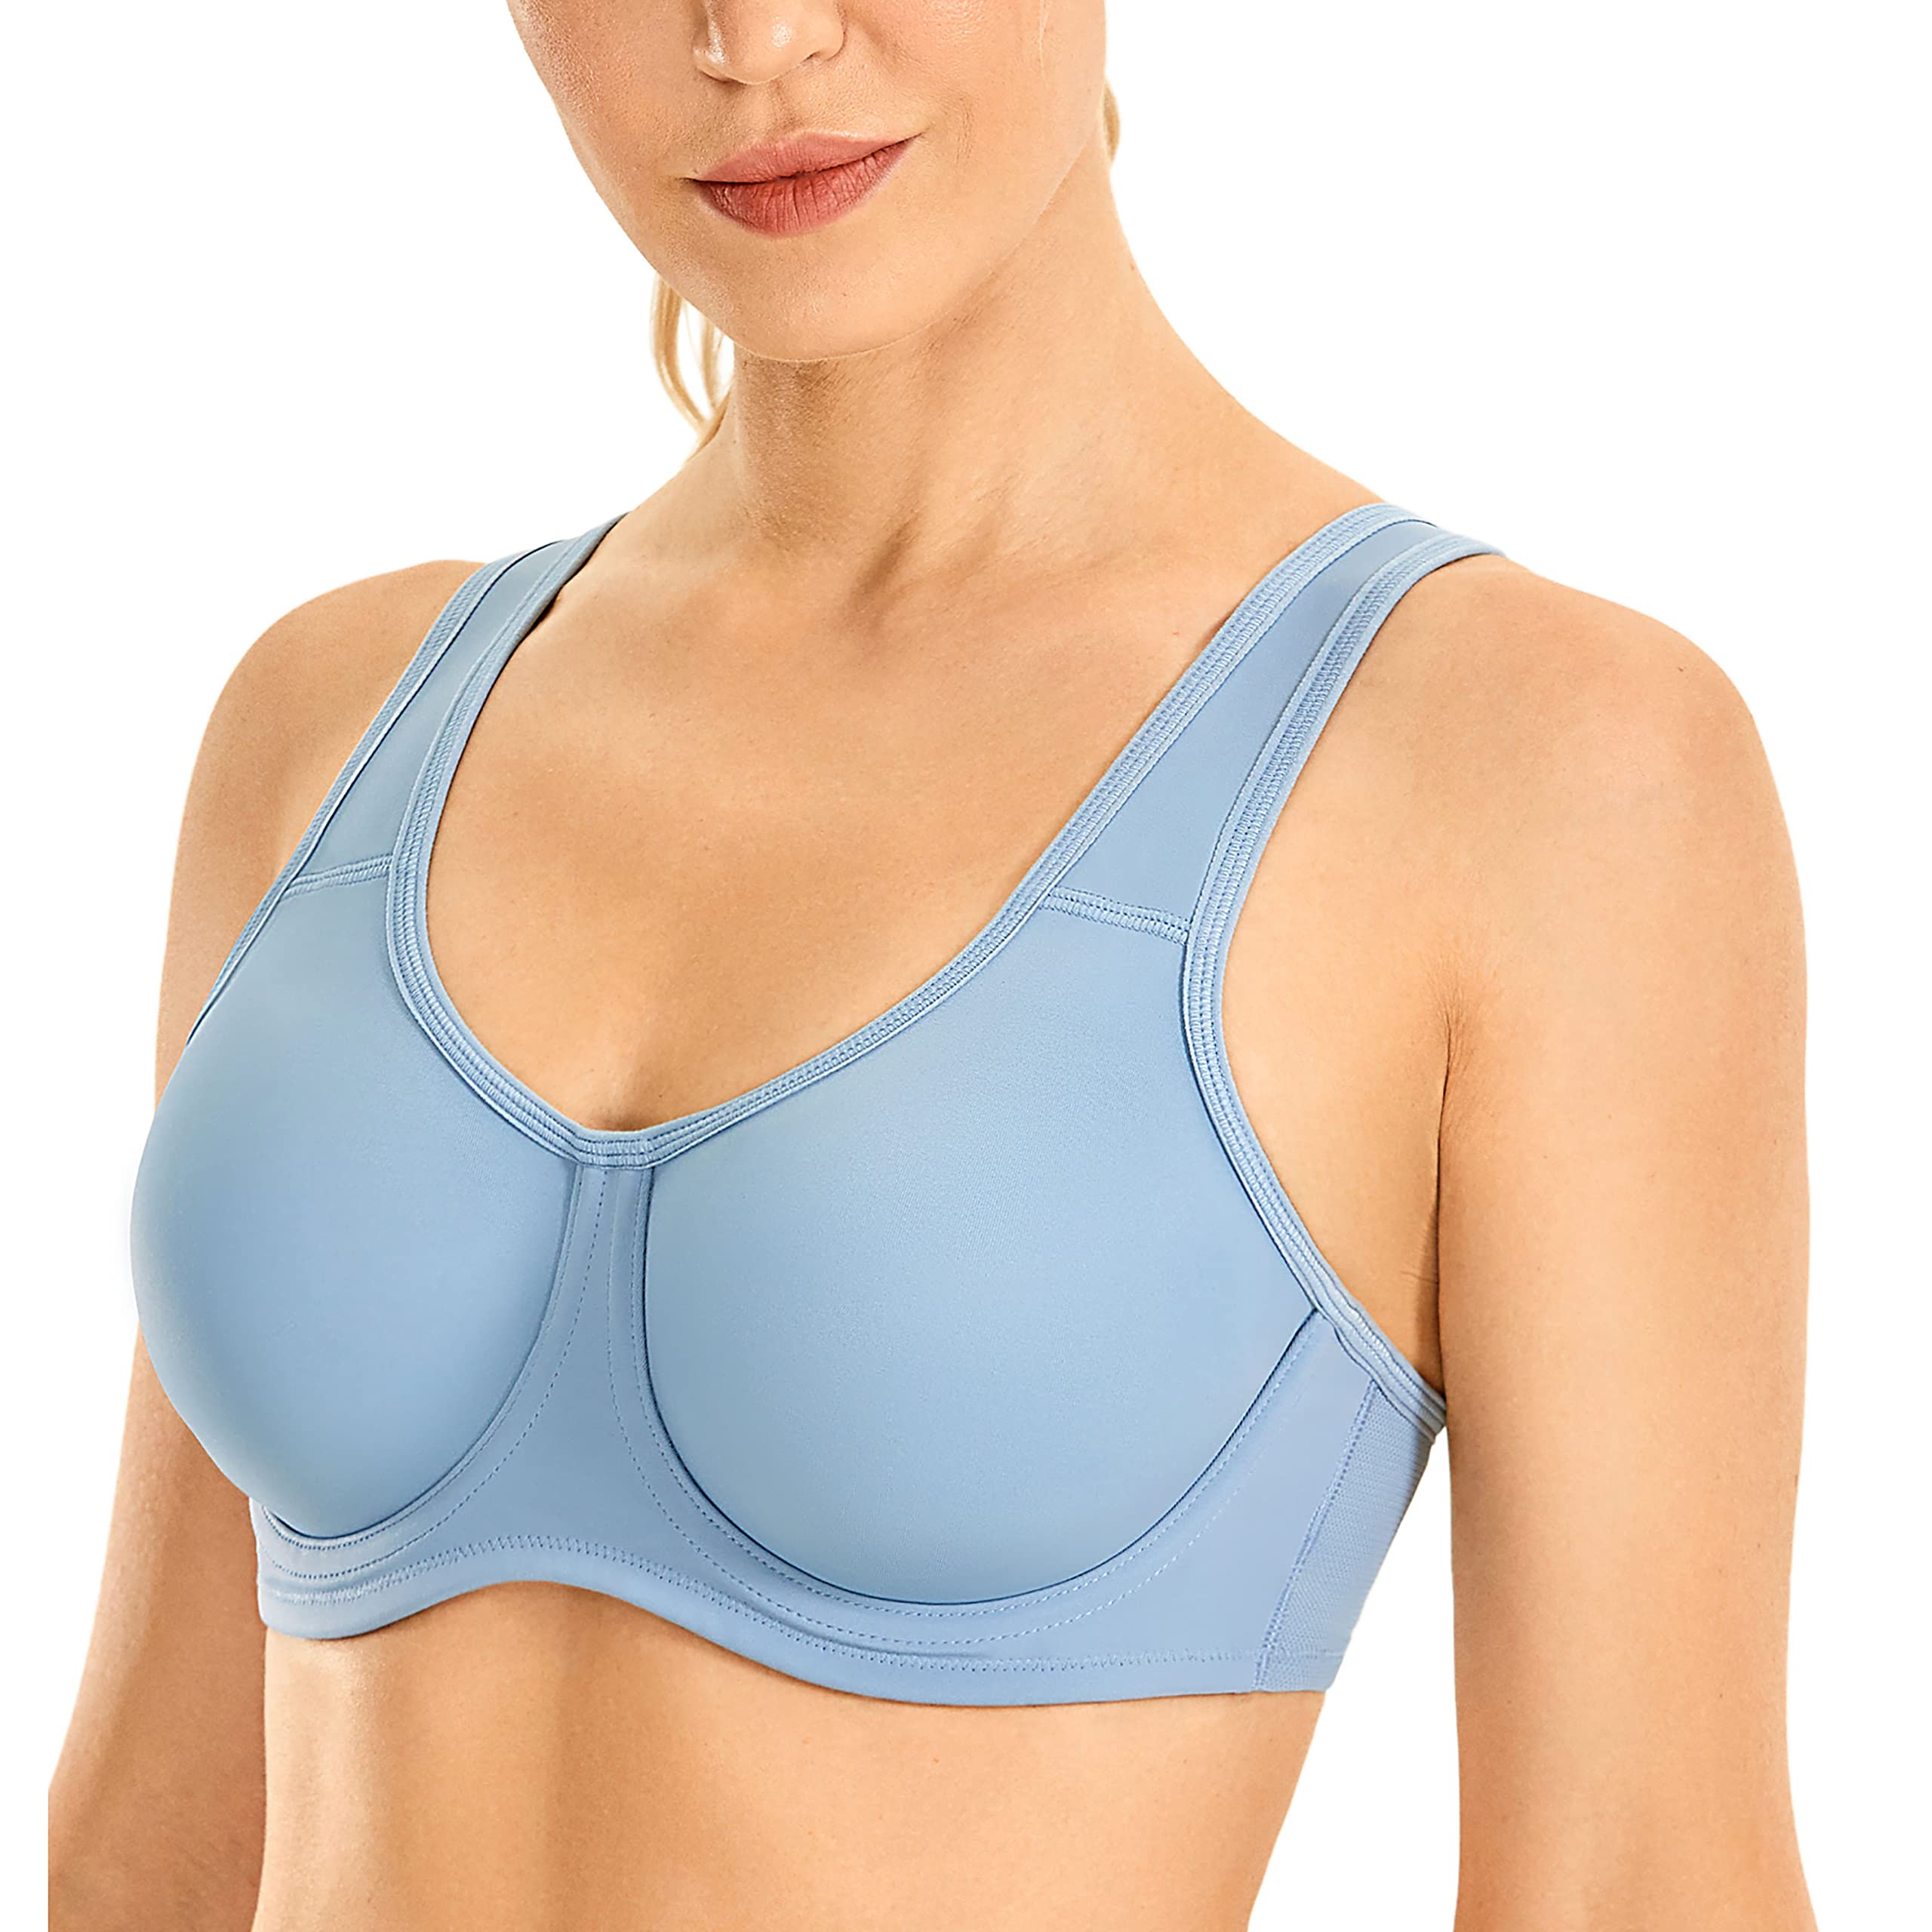 SYROKAN Womens Max control Underwire Sports Bra High Impact Plus Size with Adjustable Straps Lotus Root grey Blue 38F